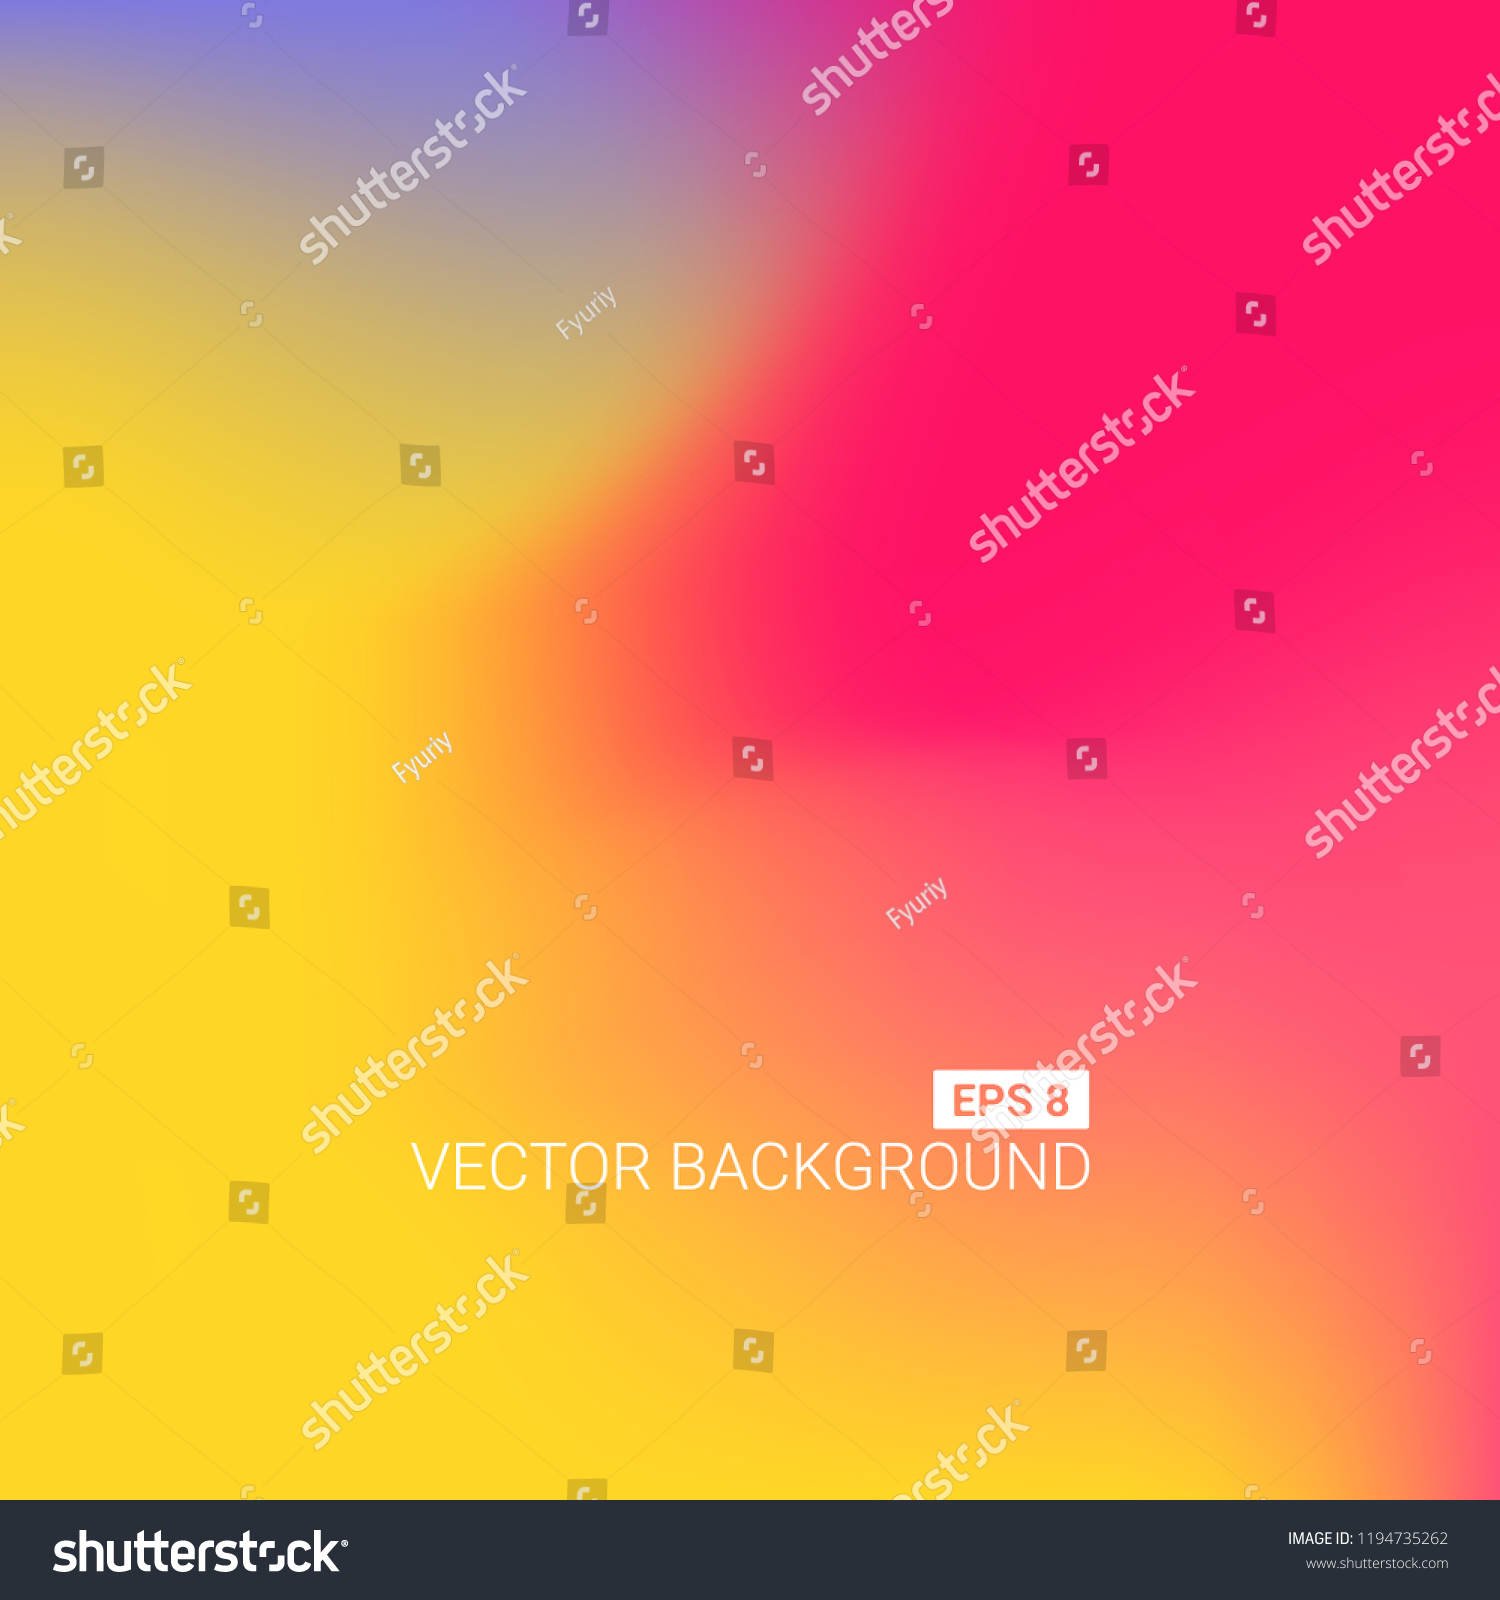 Abstract blurred gradient mesh background. Colorful smooth banner template. Easy editable soft colored vector illustration in EPS8.
New abstract modern screen vector image pattern picture #1194735262